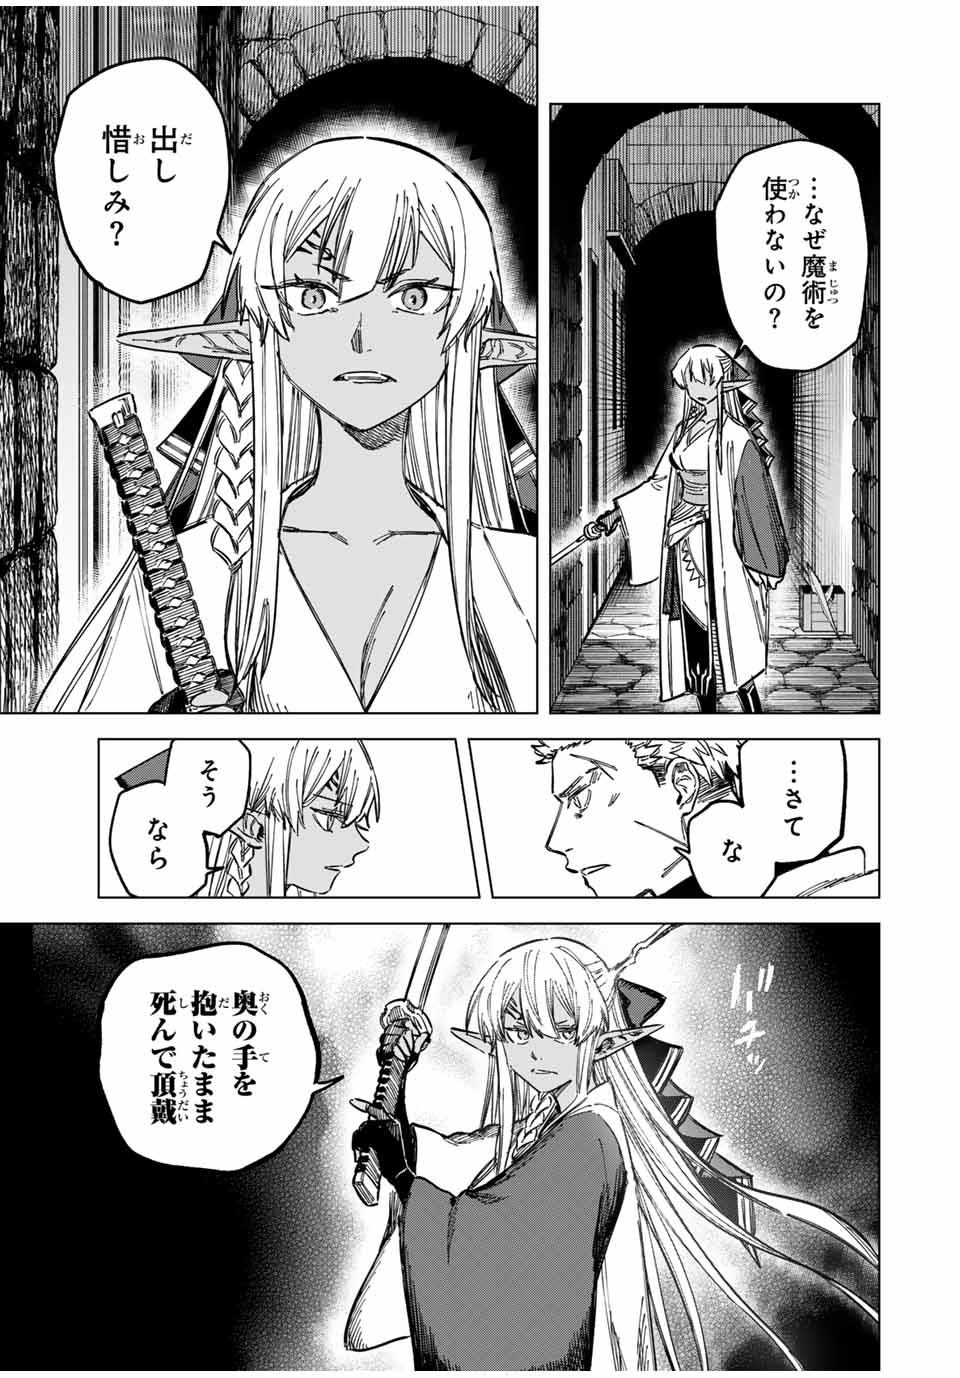 Witch and Mercenary 魔女と傭兵 第13話 - Page 11